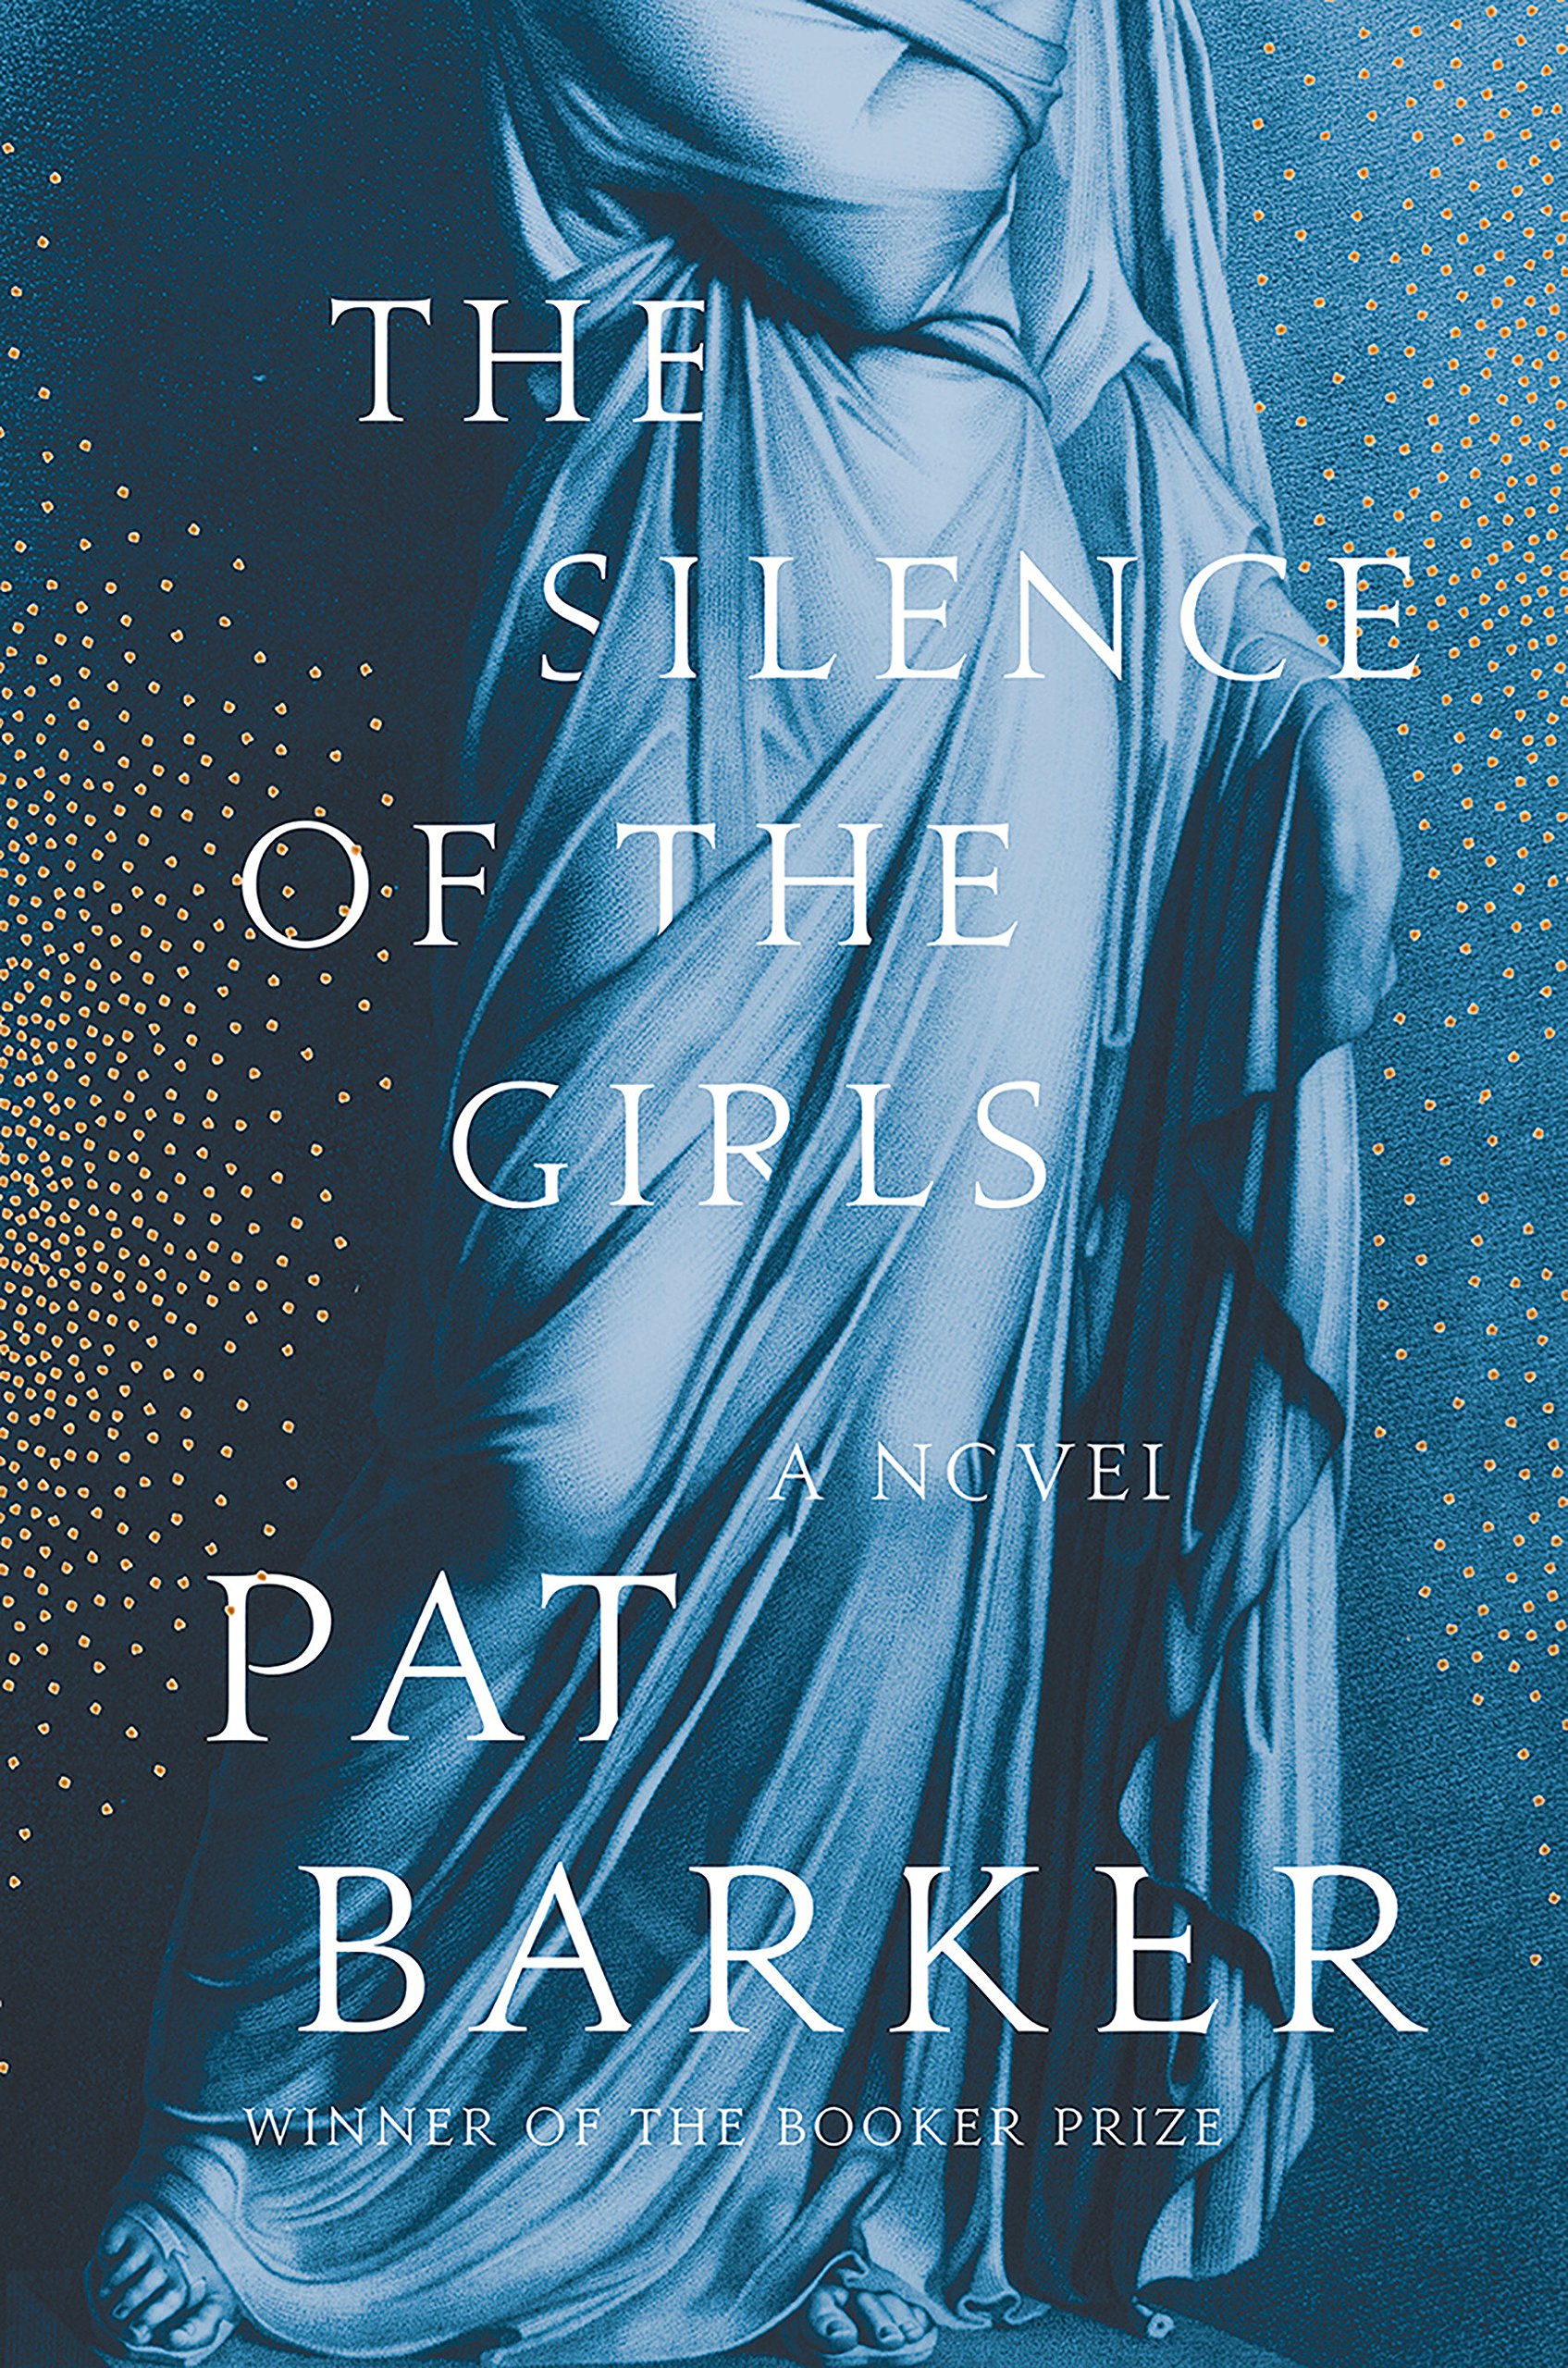 Image for "The Silence of the Girls"